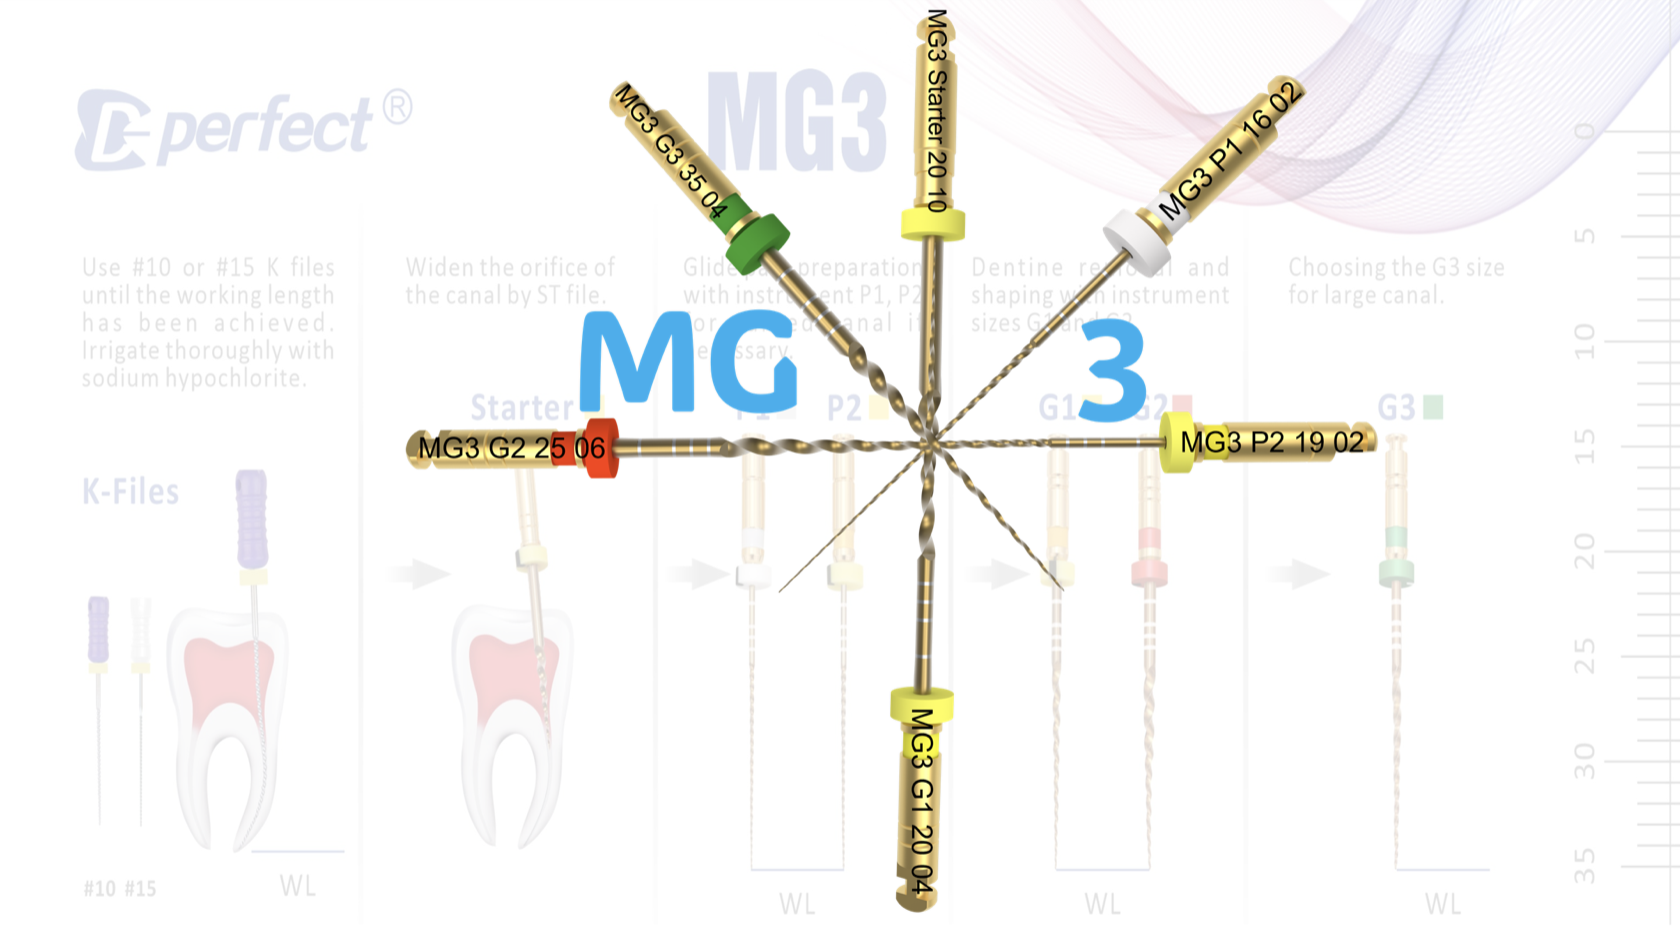 MG3 let's shape calcified and moderately curved root canals